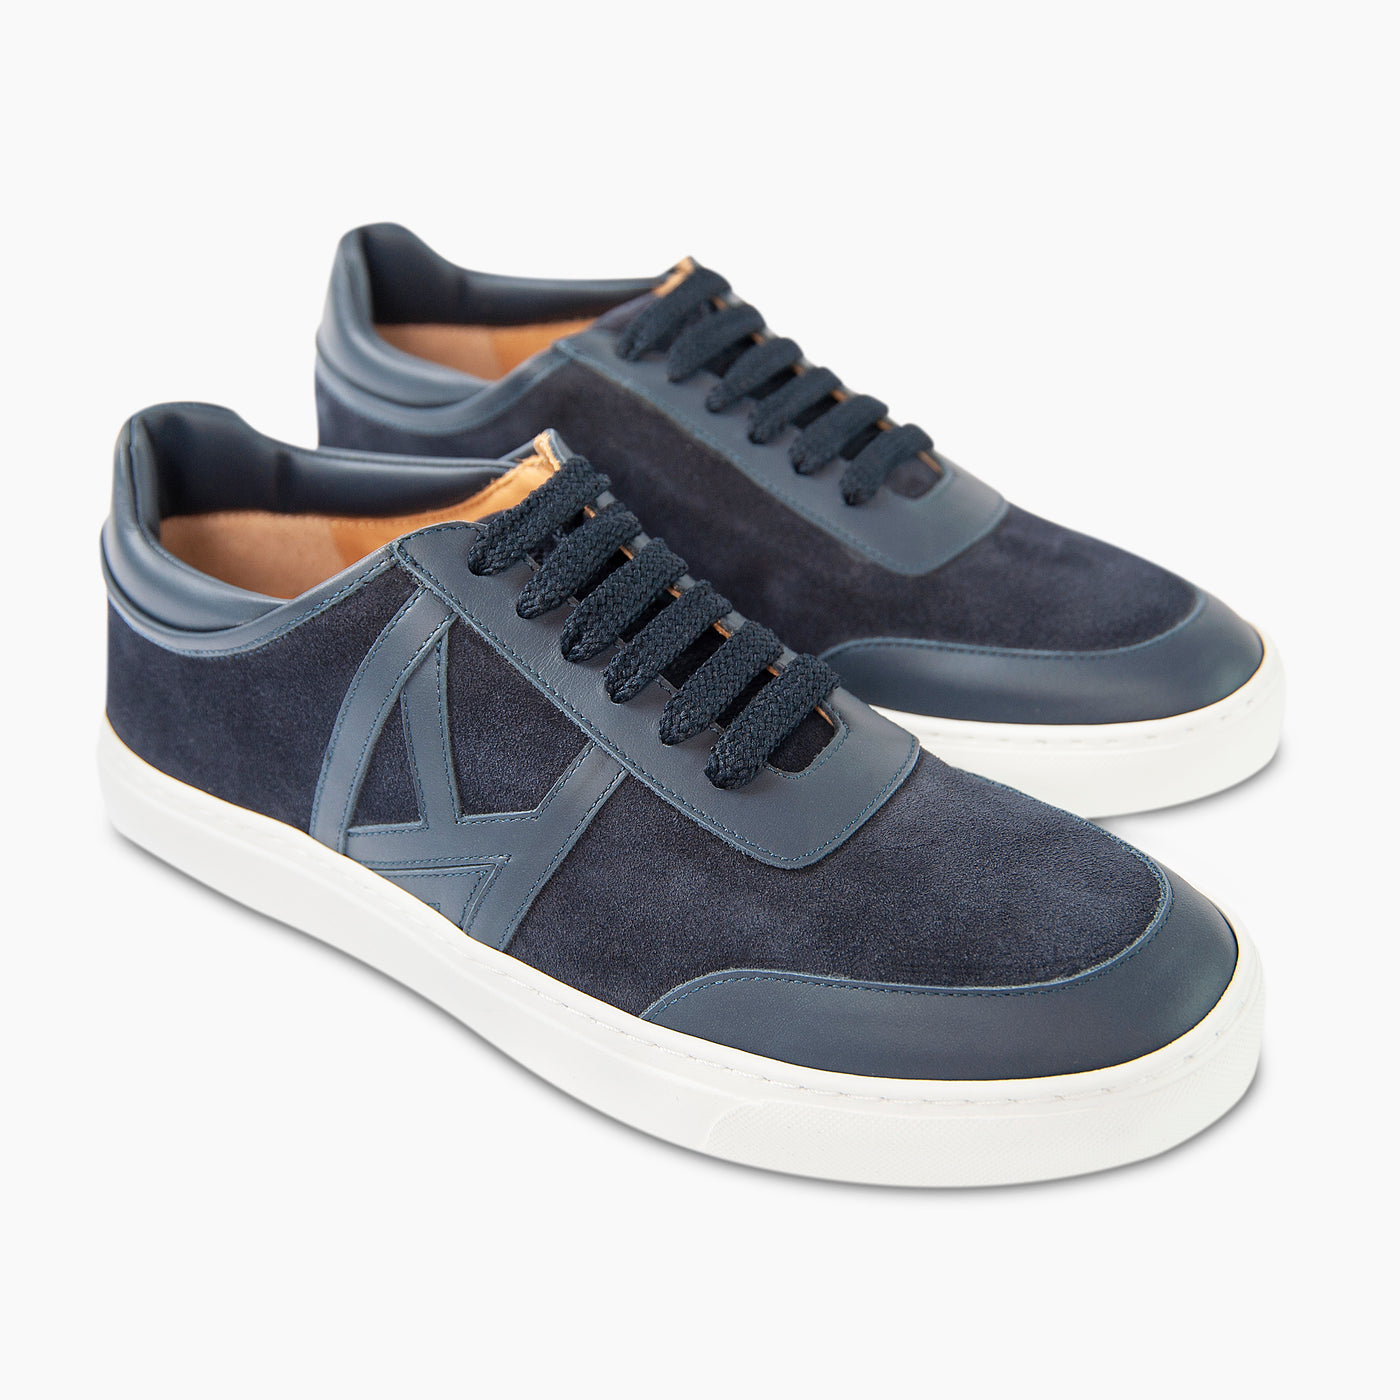 RUN CLASSIC Suede Leather sneakers